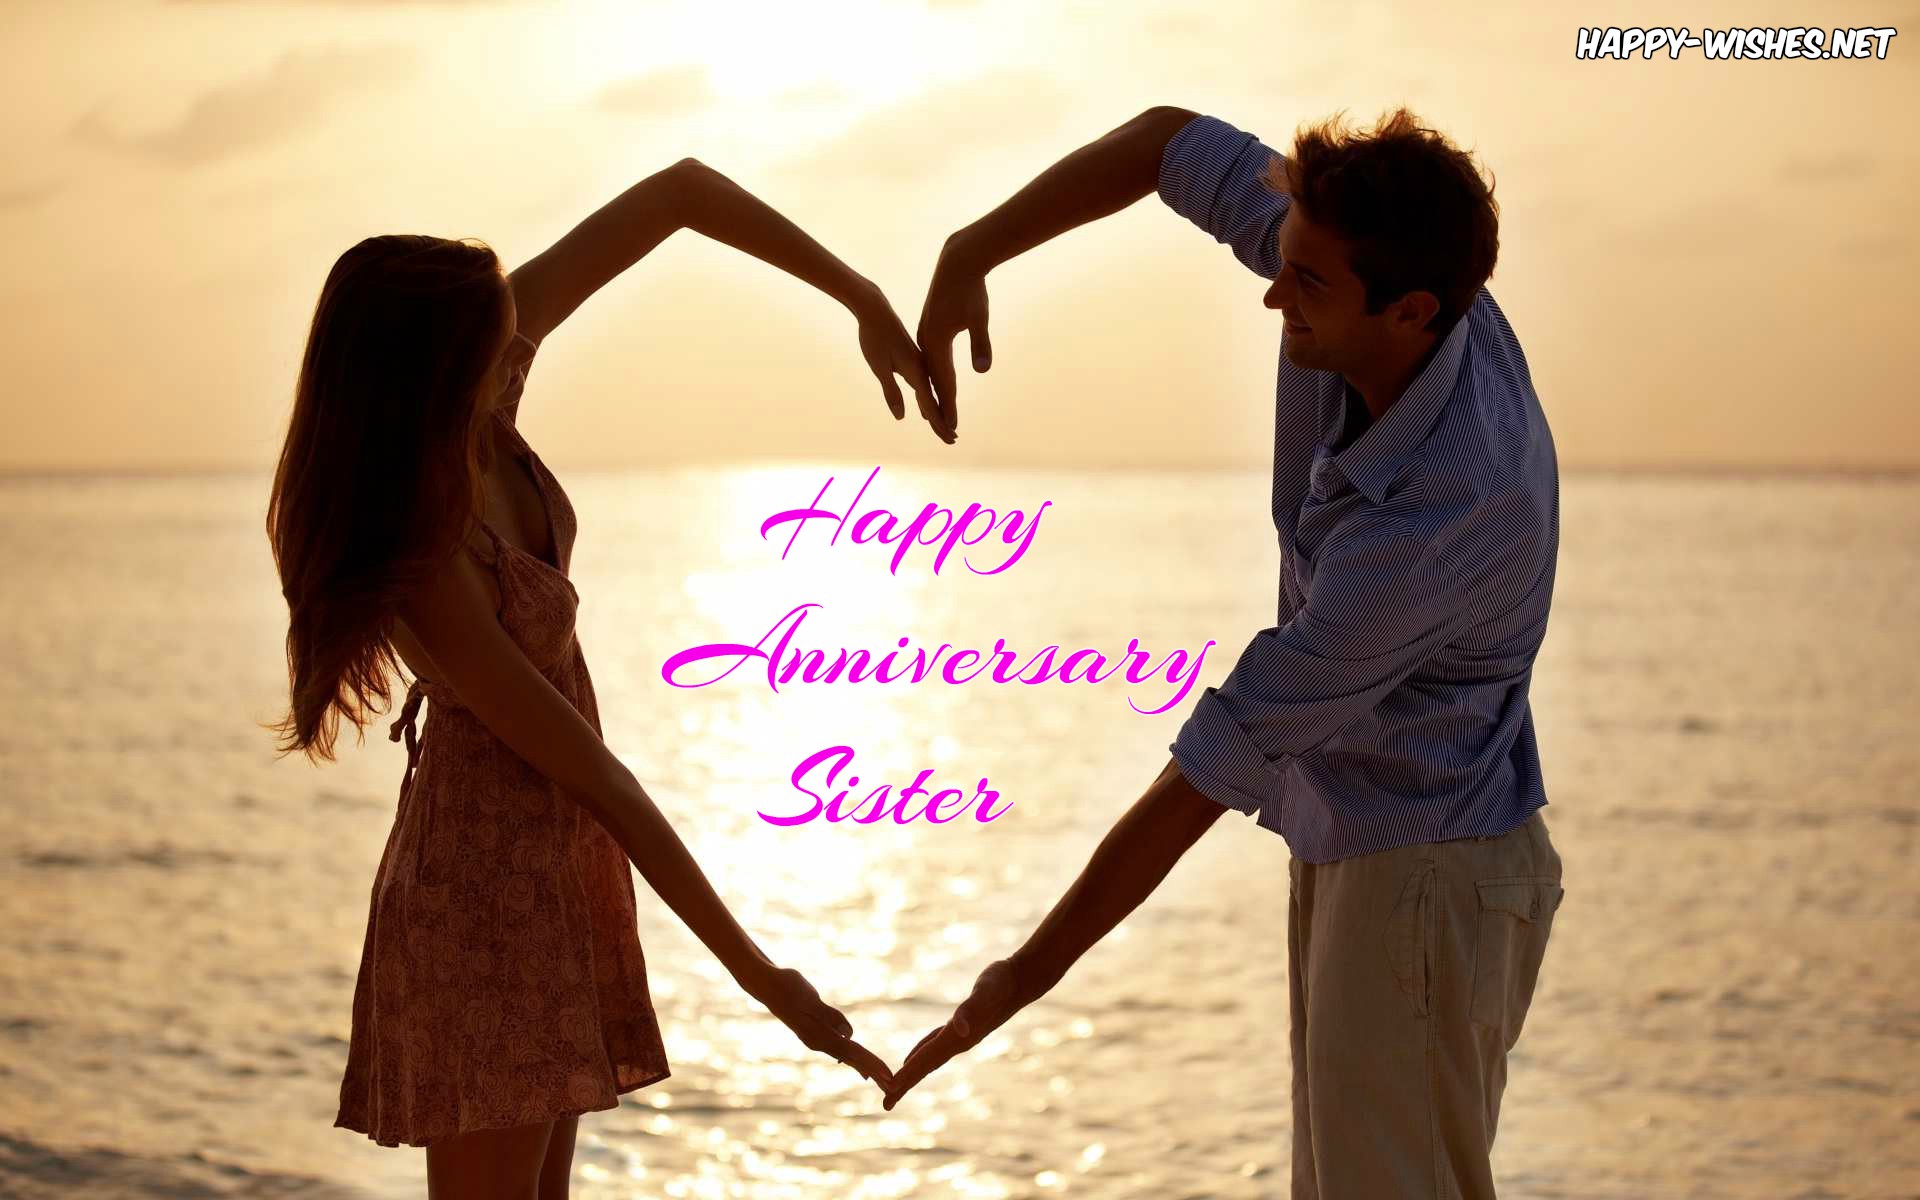 Happy ANNIVERSARY WISHES FOR SISTER